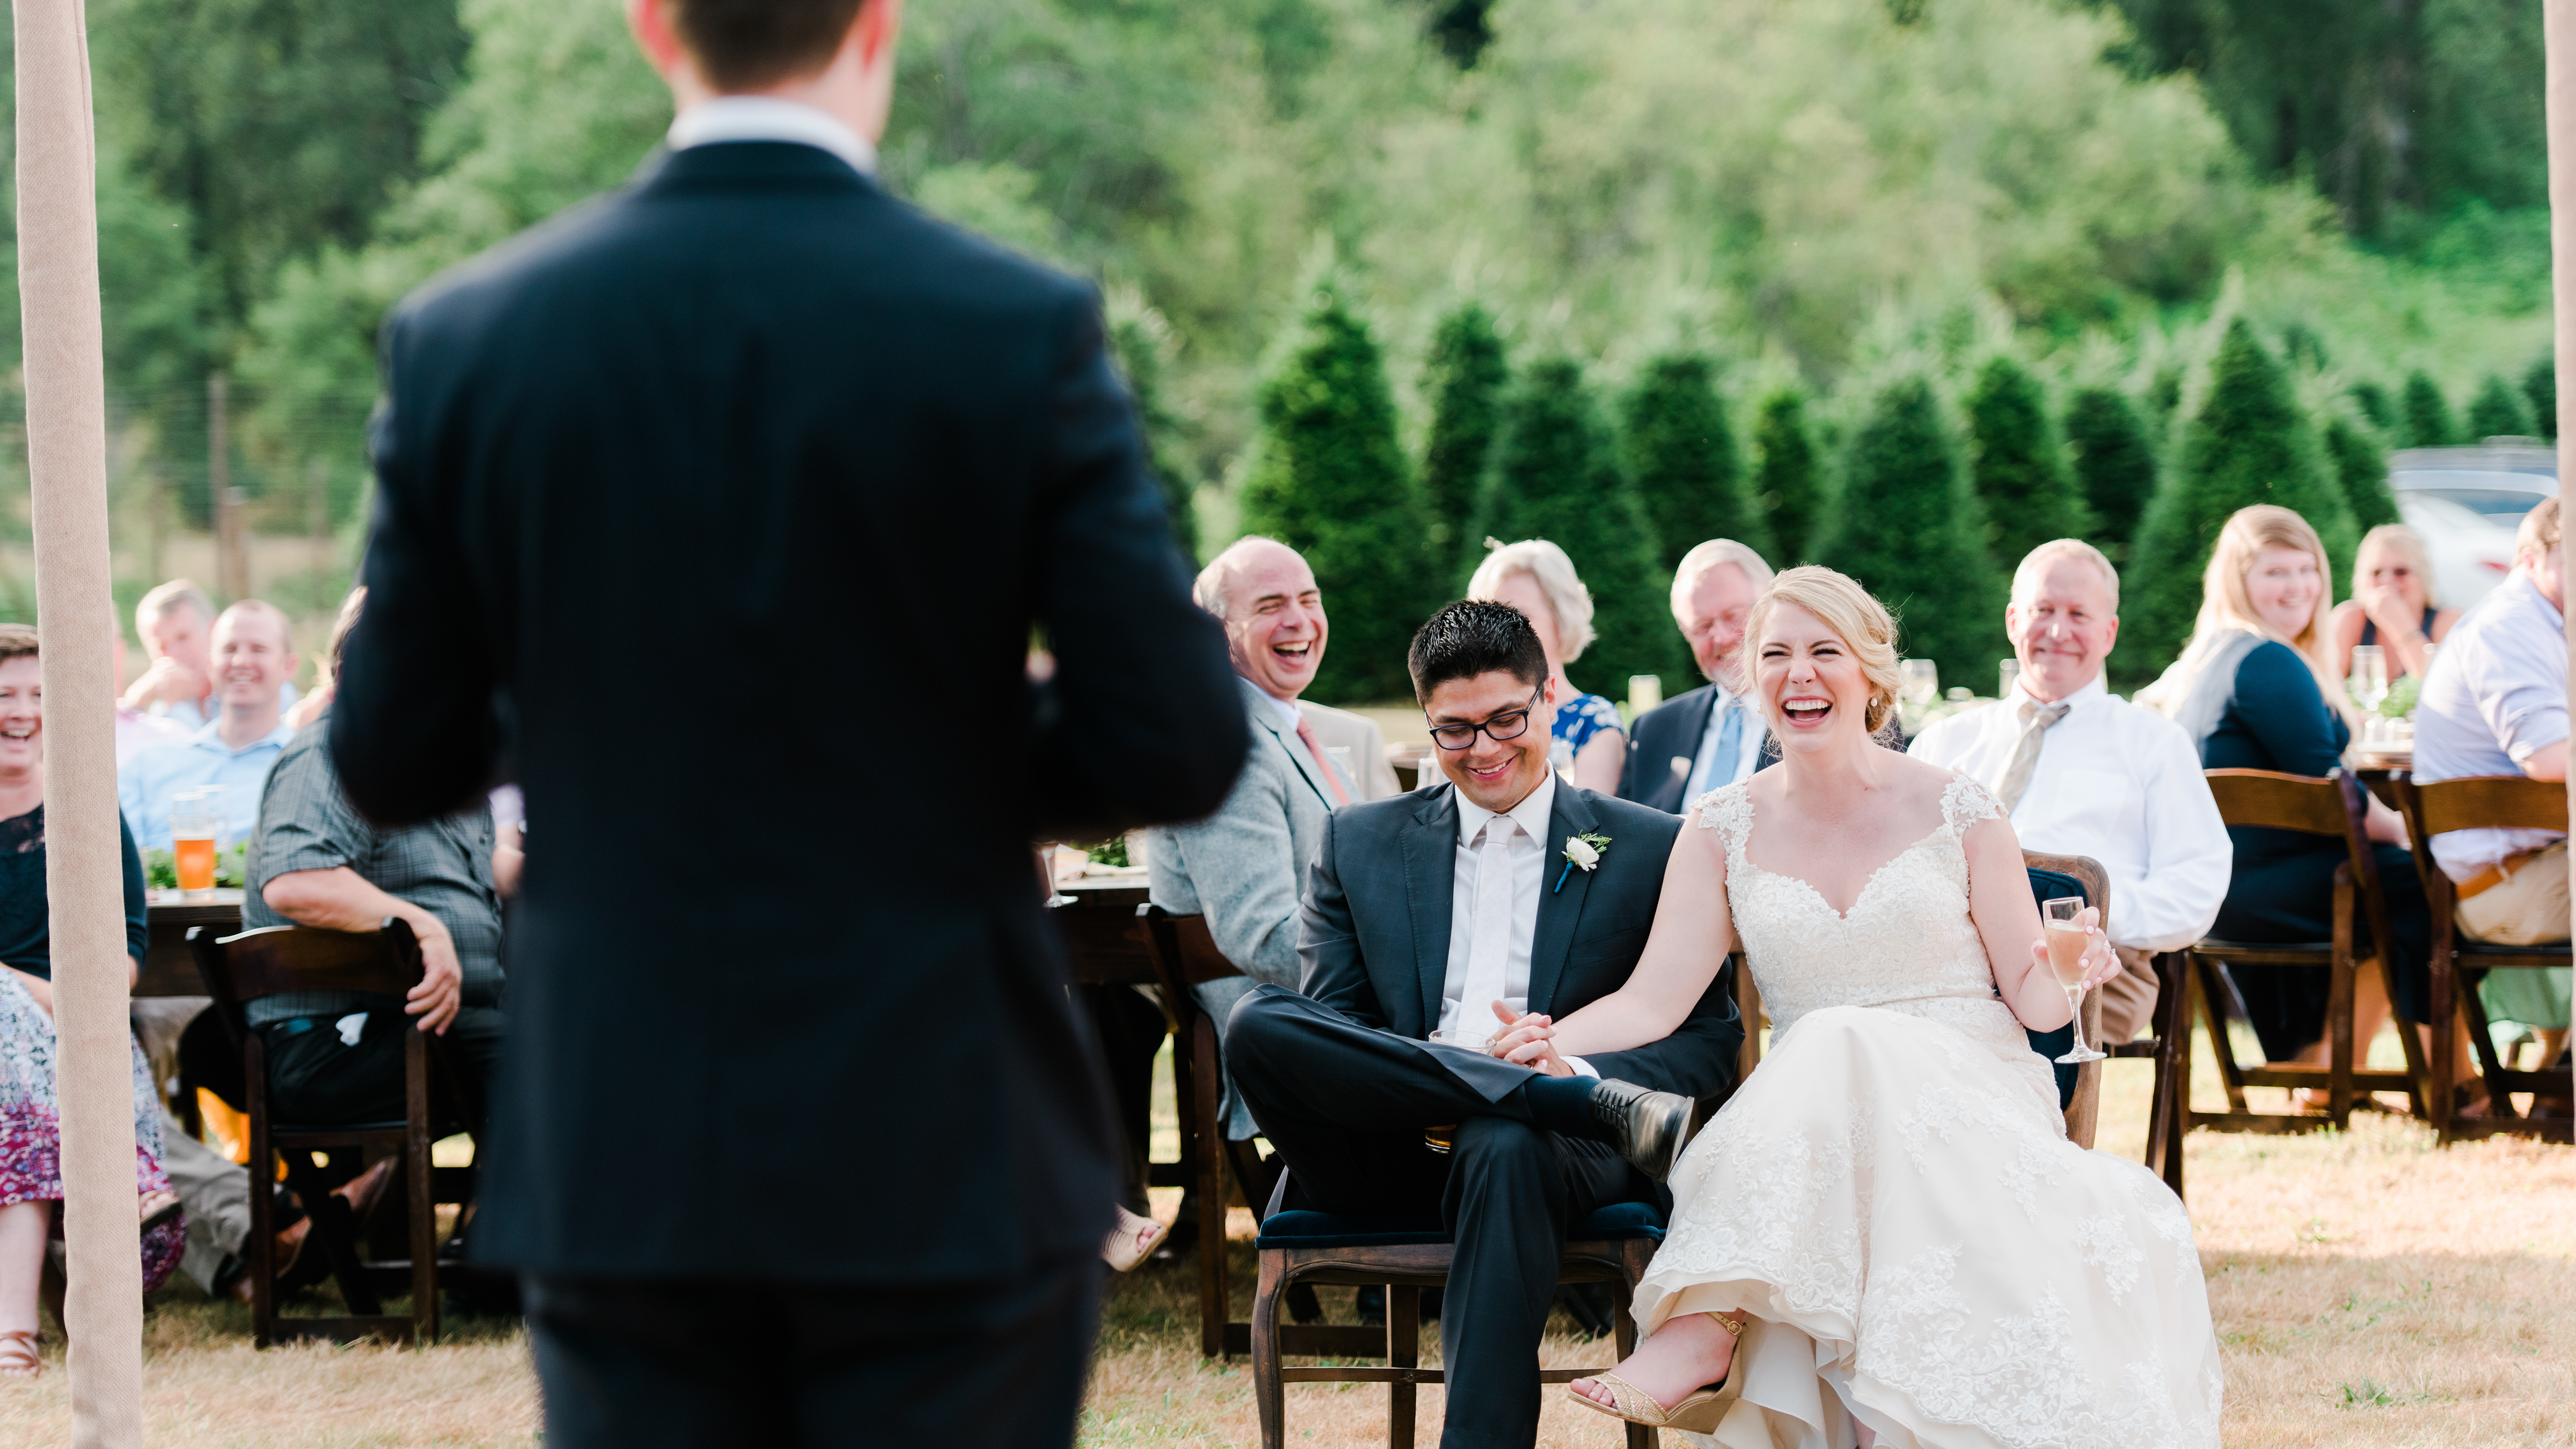 Bride and groom laughing at man giving a wedding speech